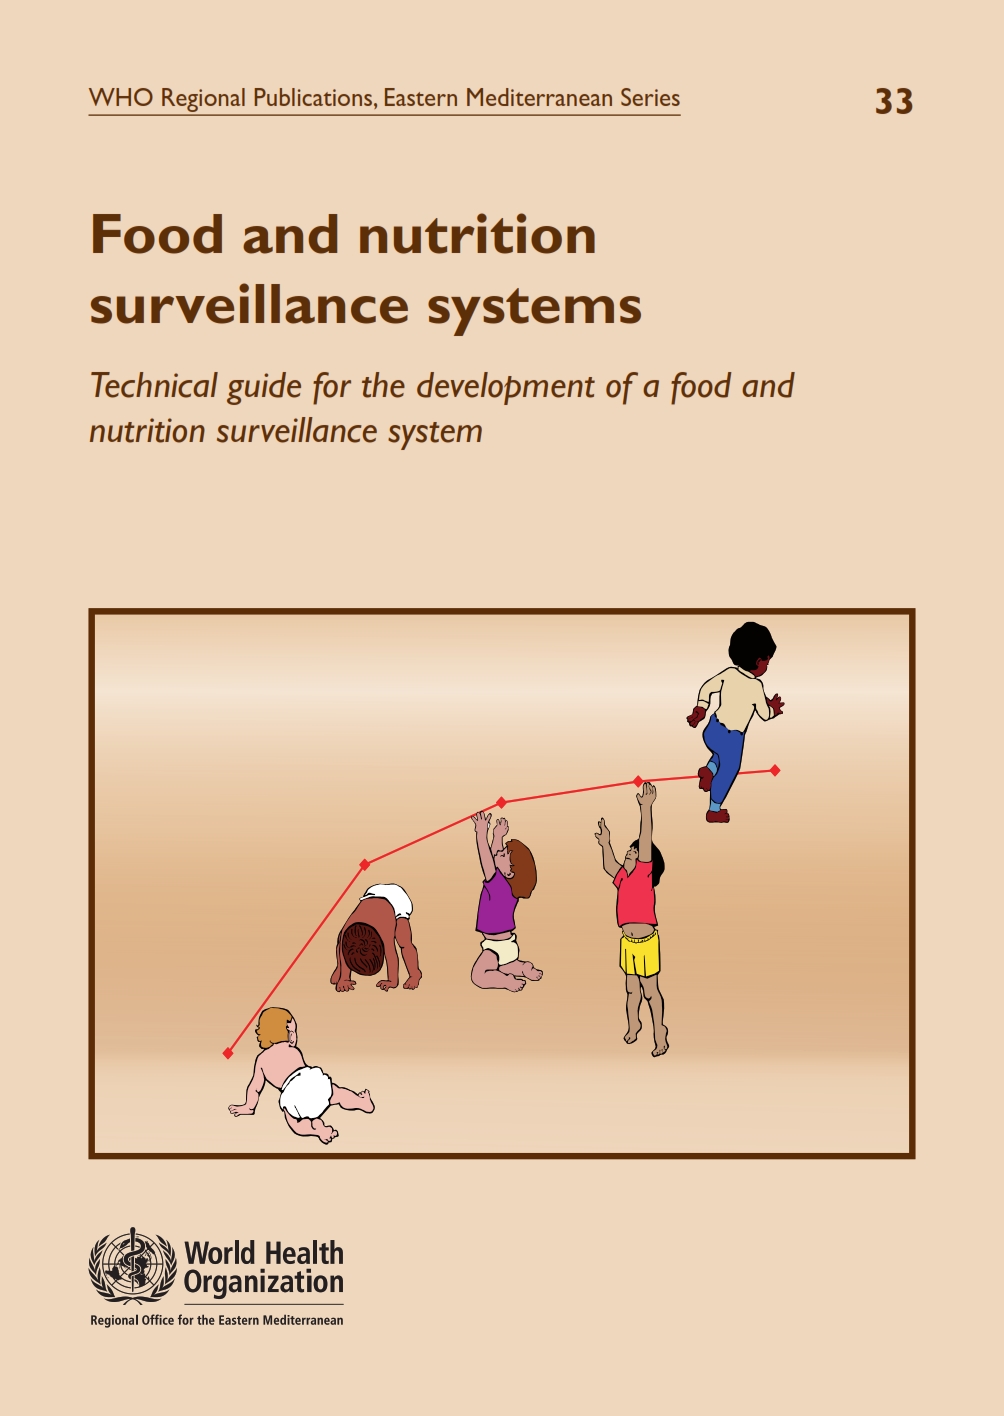 food_and_nutrition_surveillance_systems_technical_guide_001